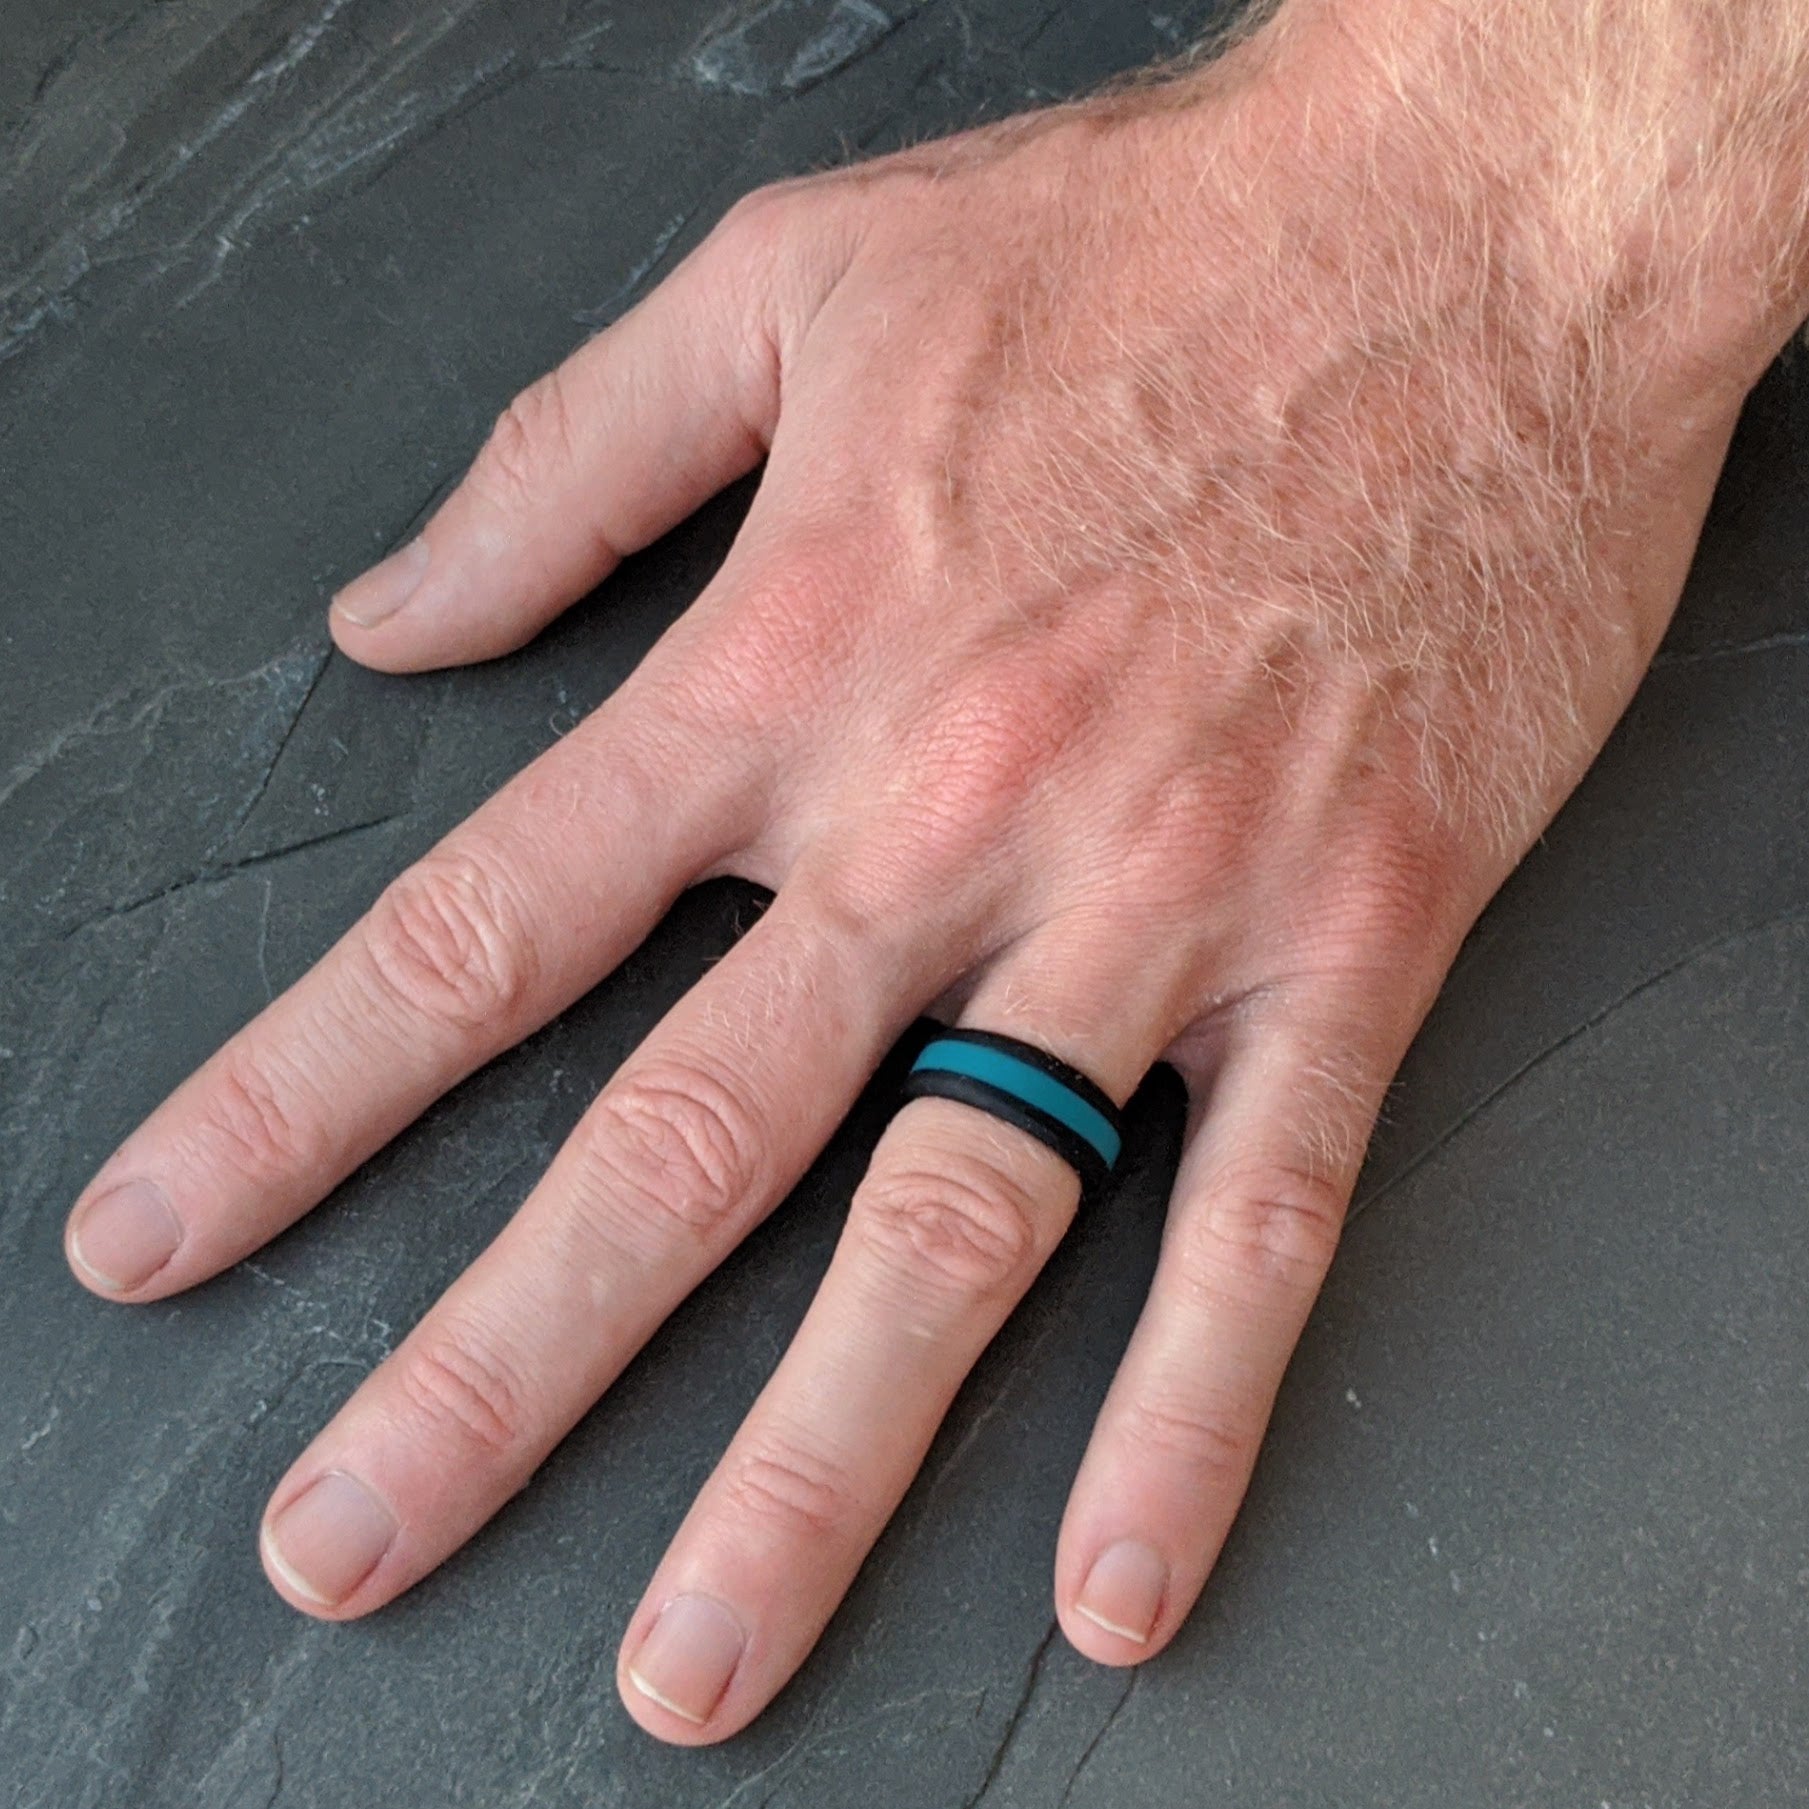 Teal Stripe Silicone Ring for Men and Women - Knot Theory